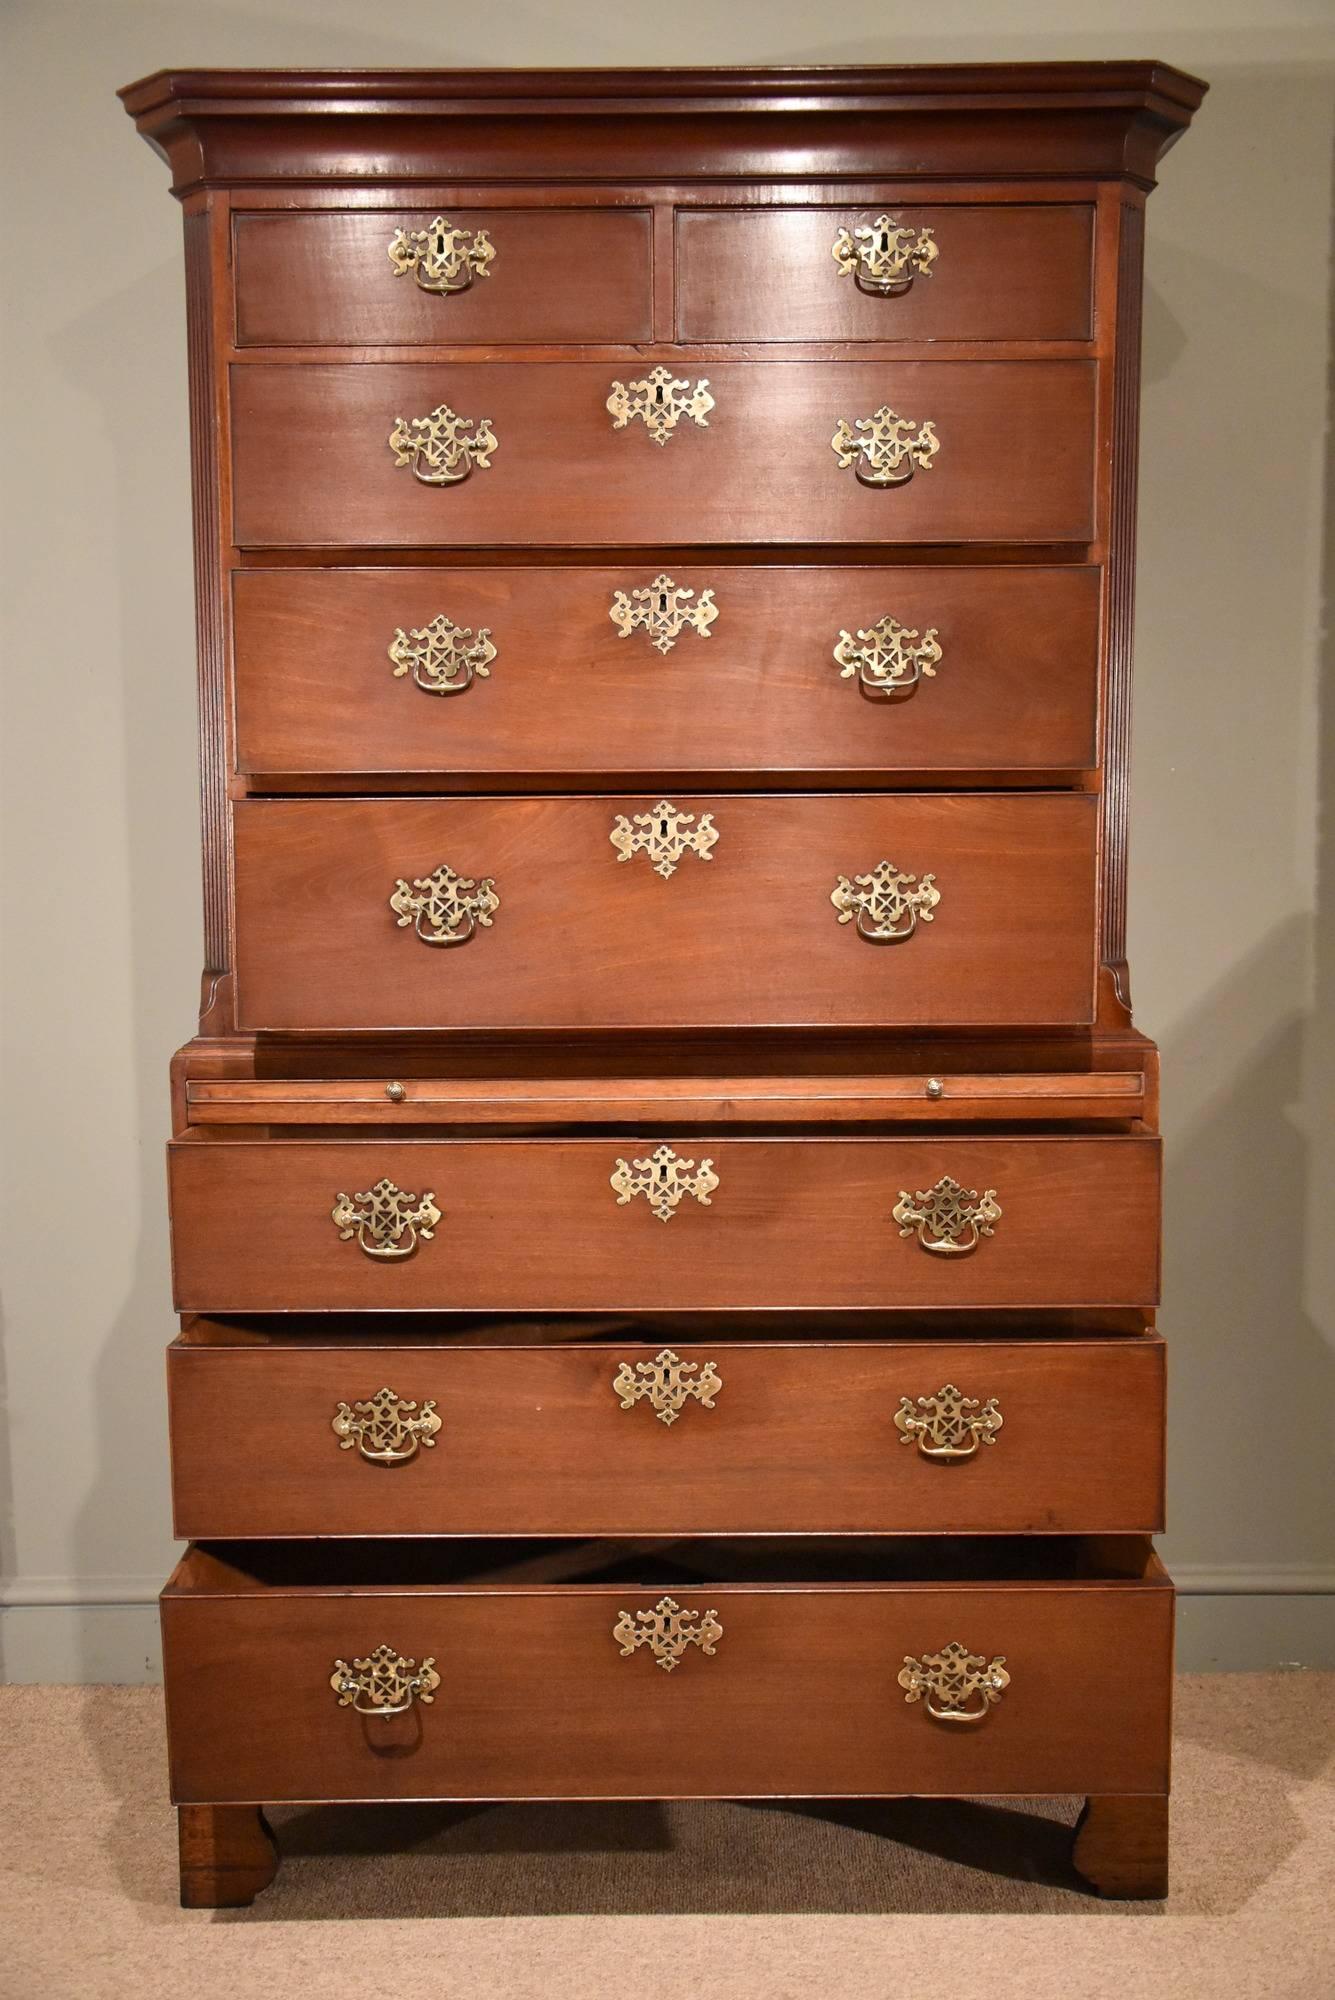 George III mahogany chest on chest with original handles and escutcheons, brushing slide, canted, reeded corners to top all on original bracket feet.

Dimensions
Height 75.5